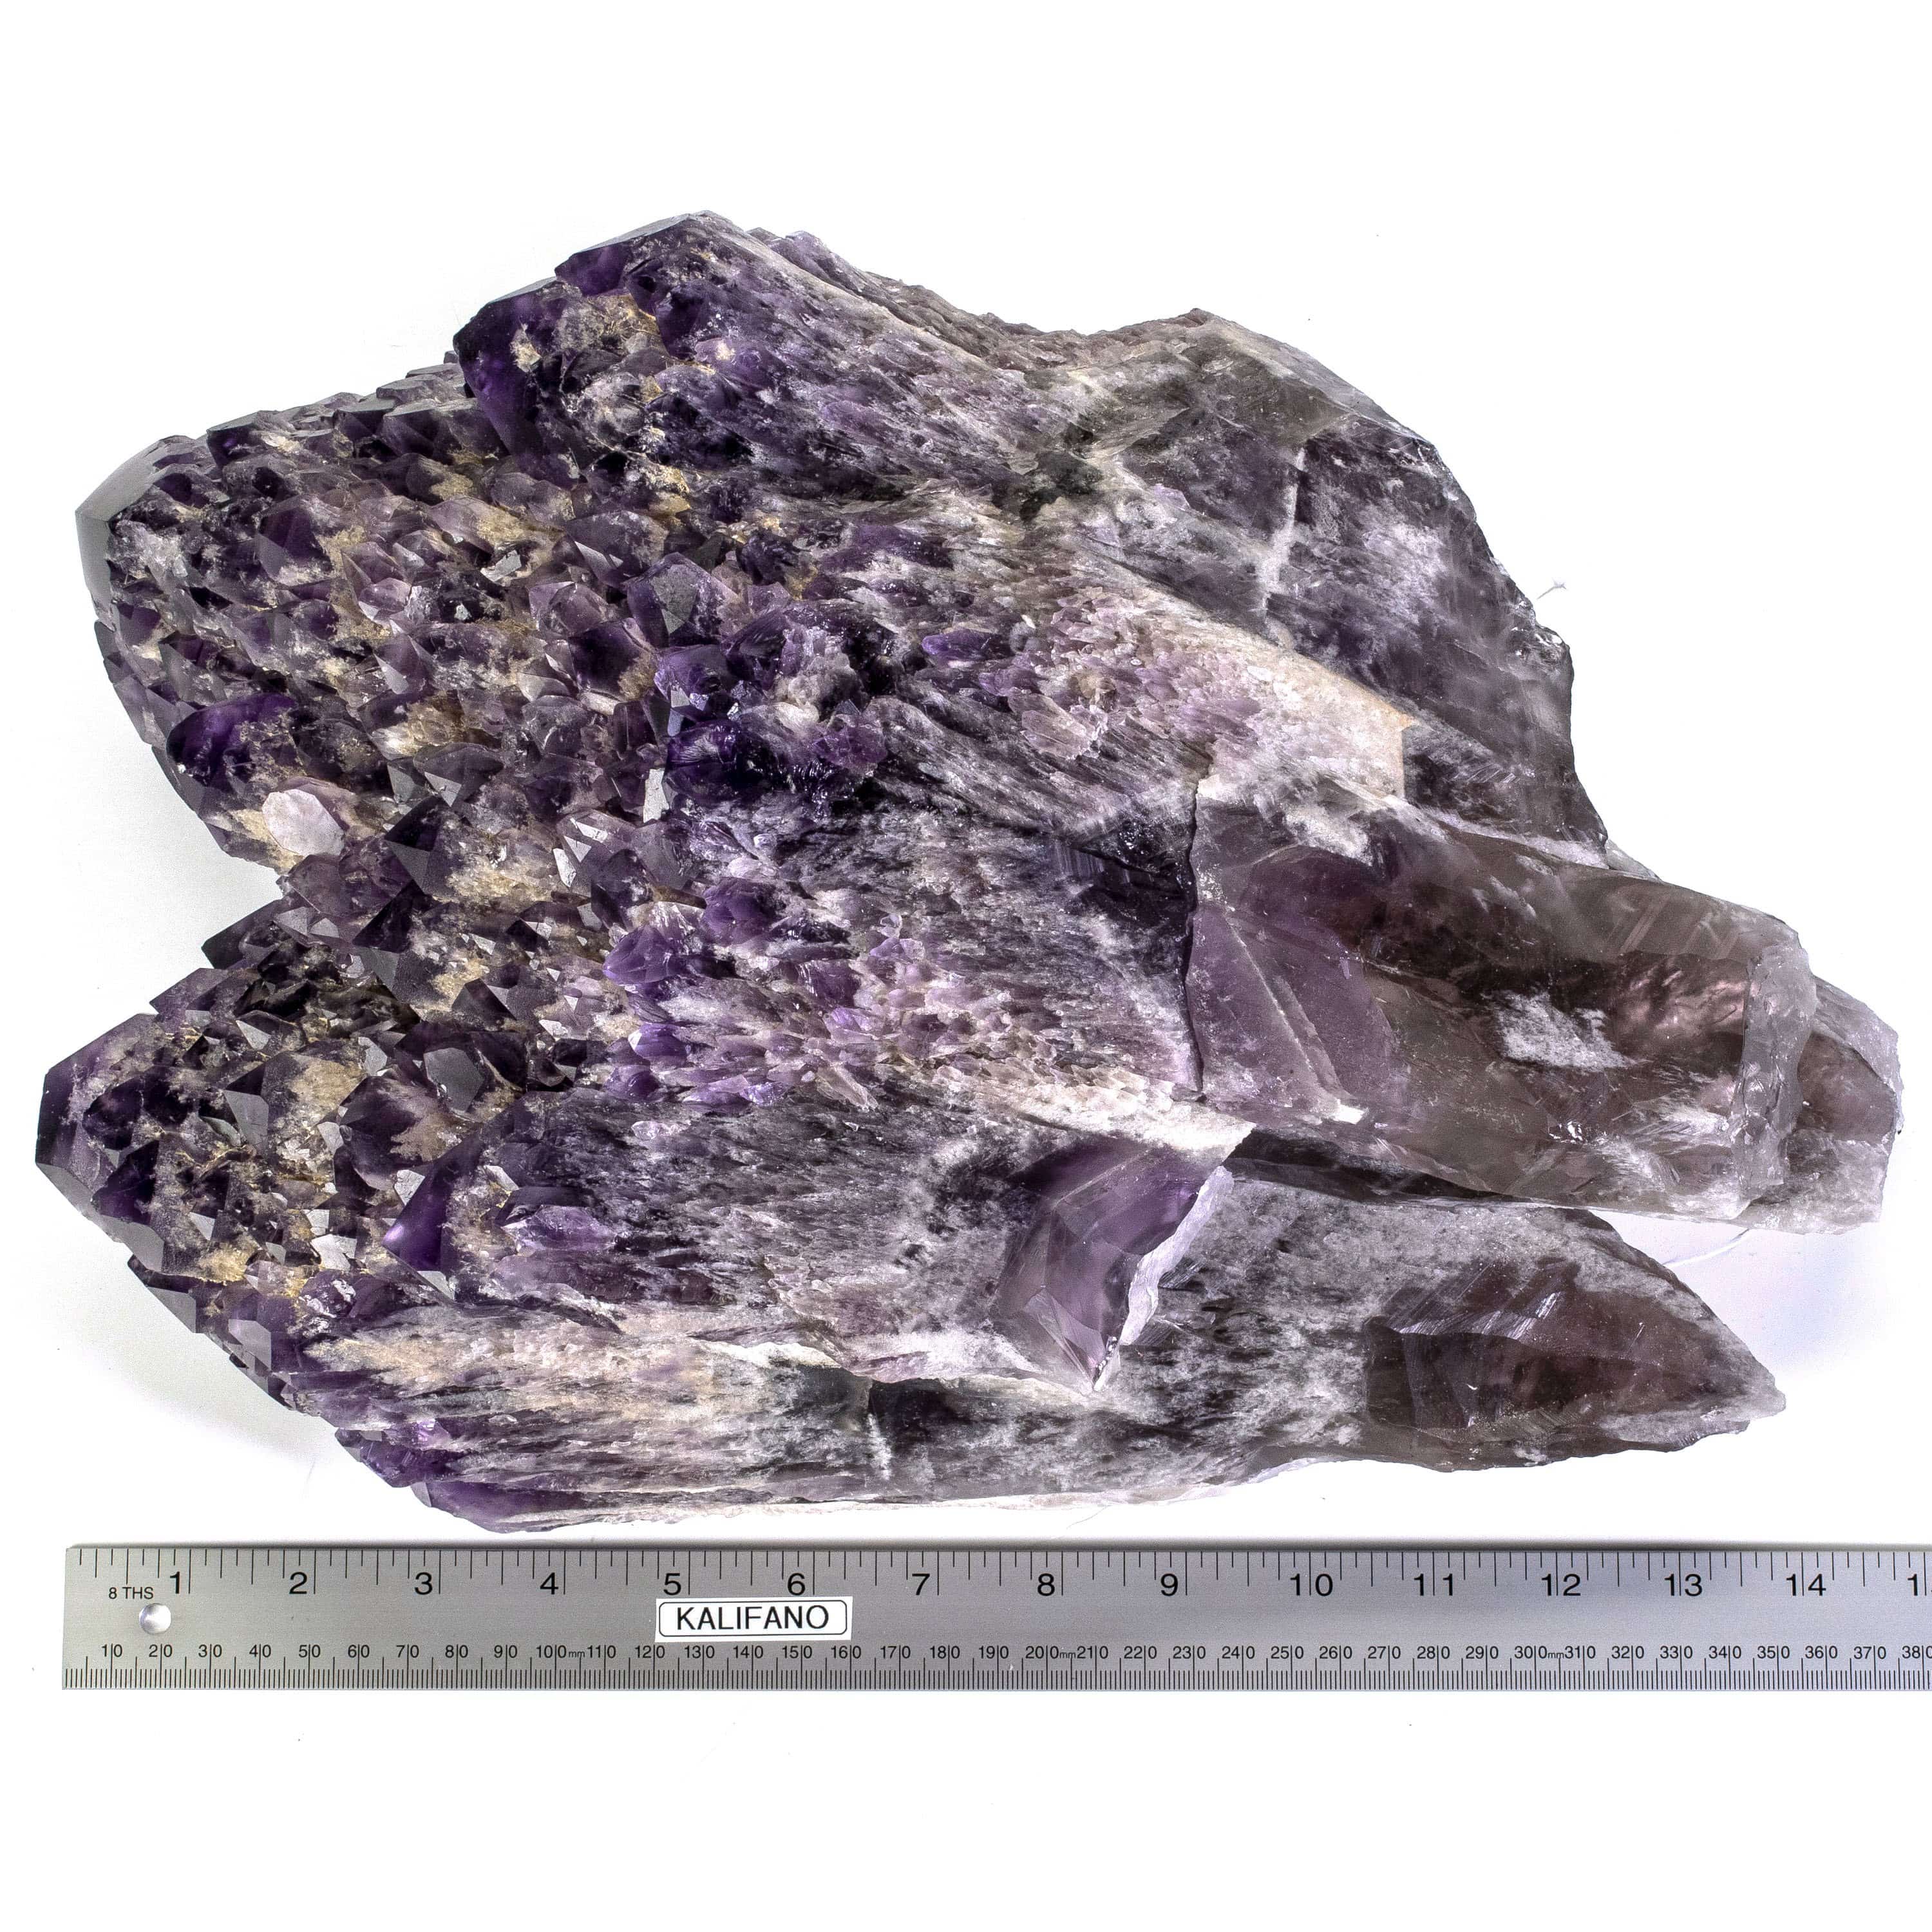 Kalifano Amethyst Rare Natural Elestial Amethyst Cluster Point from Brazil - 33.7 lbs ALW5800.001